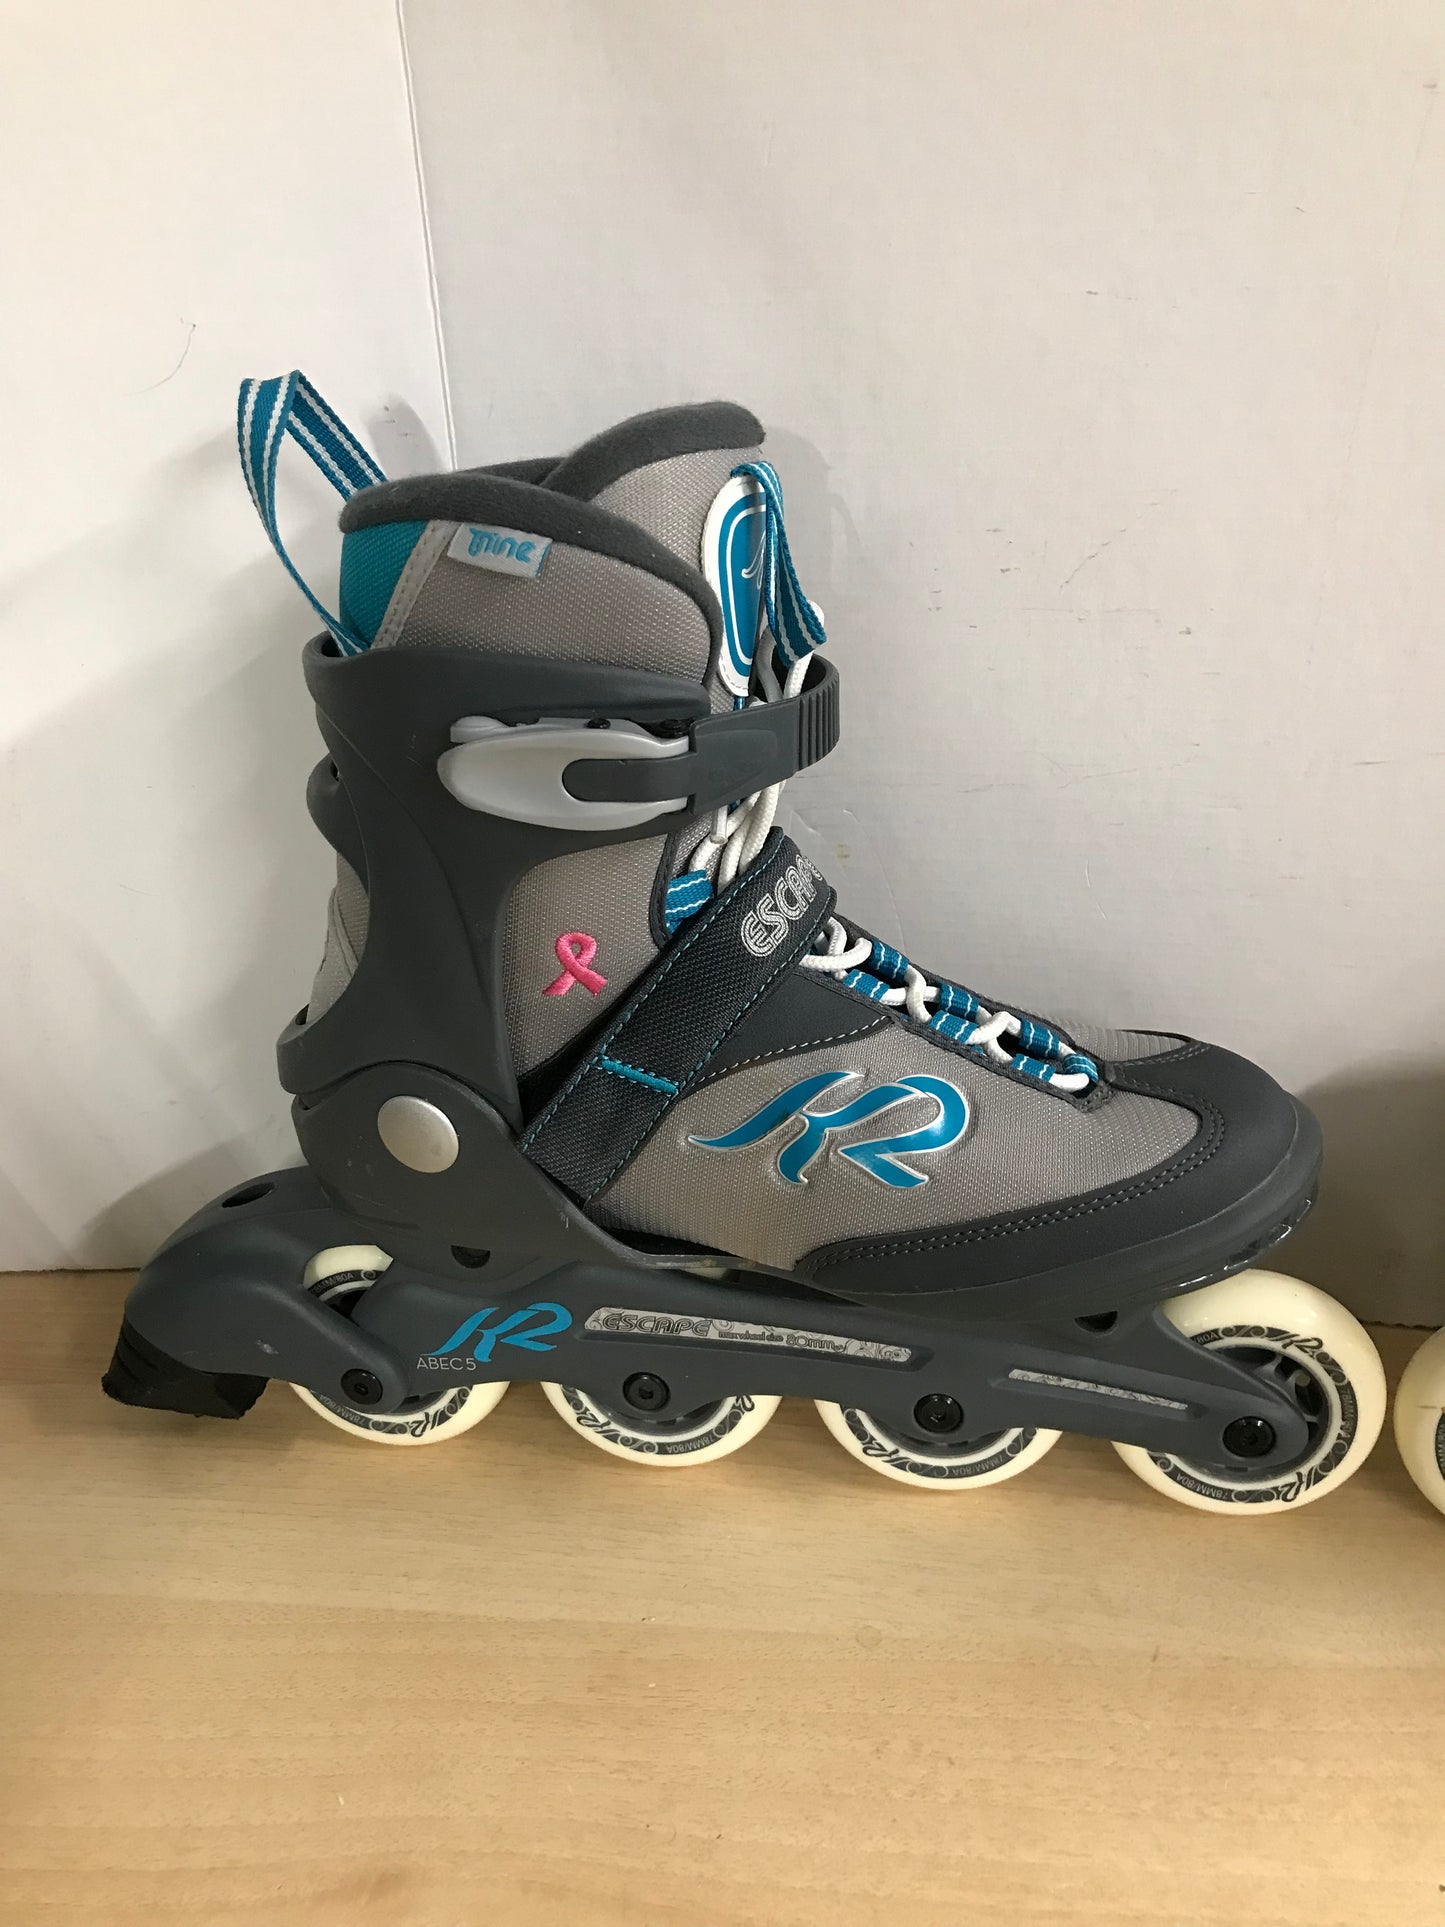 Inline Roller Skates Ladies Size 8 K-2 Grey Teal With Rubber Wheels As New Excellent